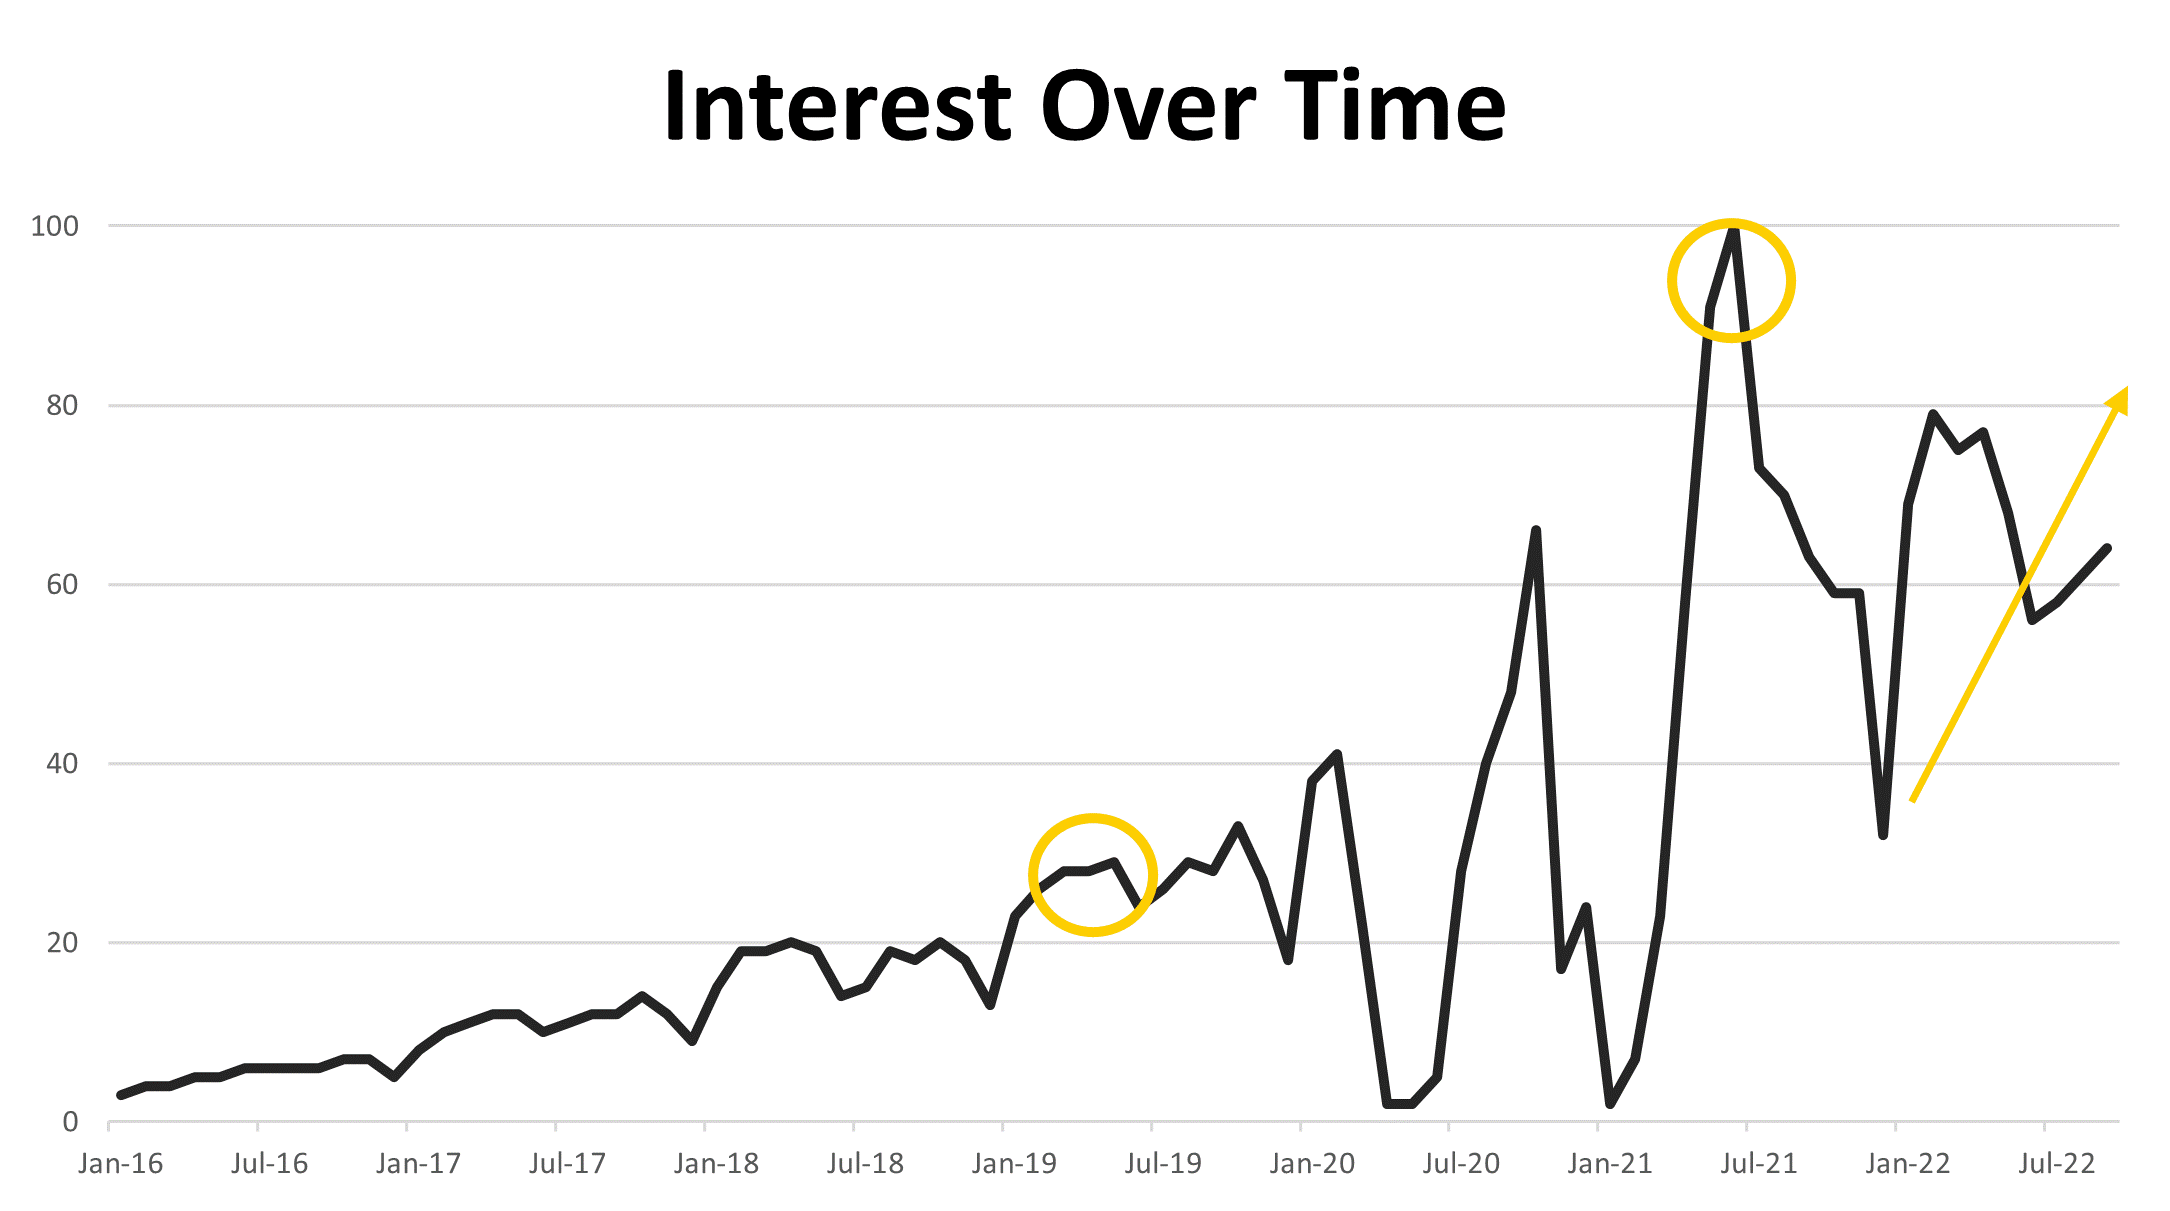 Interest over time